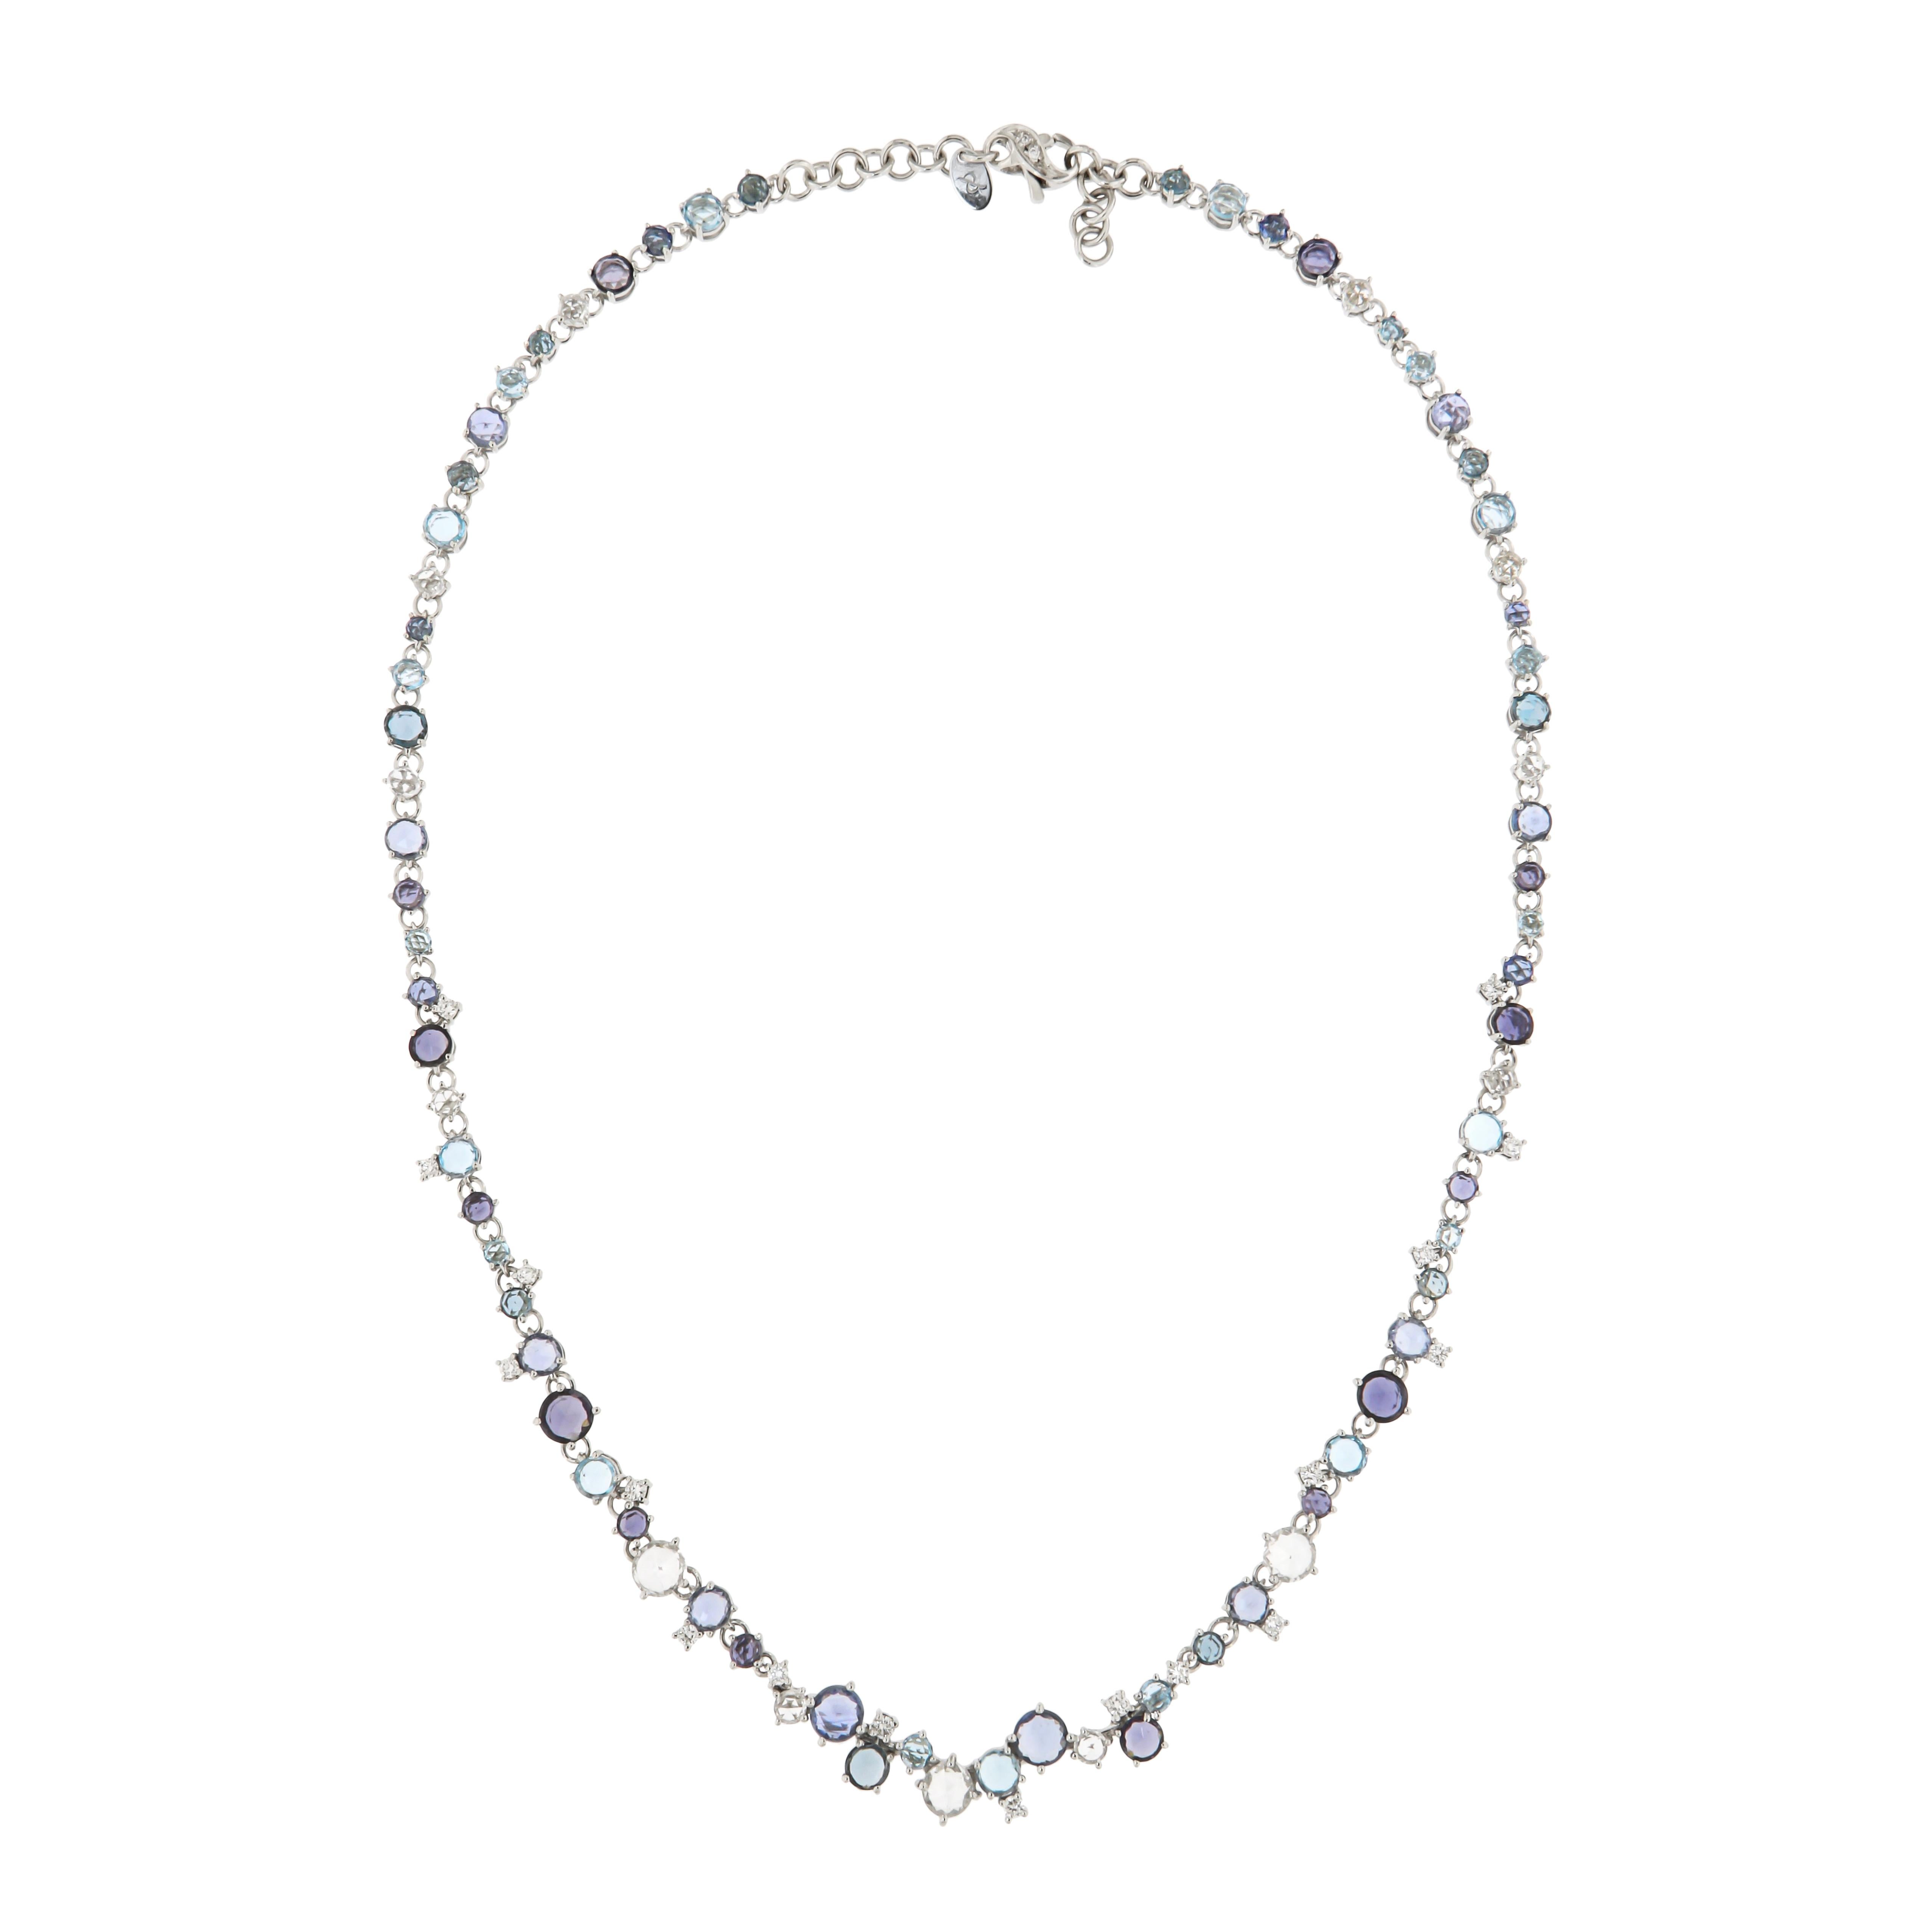 Necklace White 18K Gold (Matching Necklace and Ring Available)

Diamond 0,25 ct
Blue Sapphire
London Blue Topaz

Weight 5.40

It is our honour to create fine jewelry, and it’s for that reason that we choose to only work with high-quality, enduring